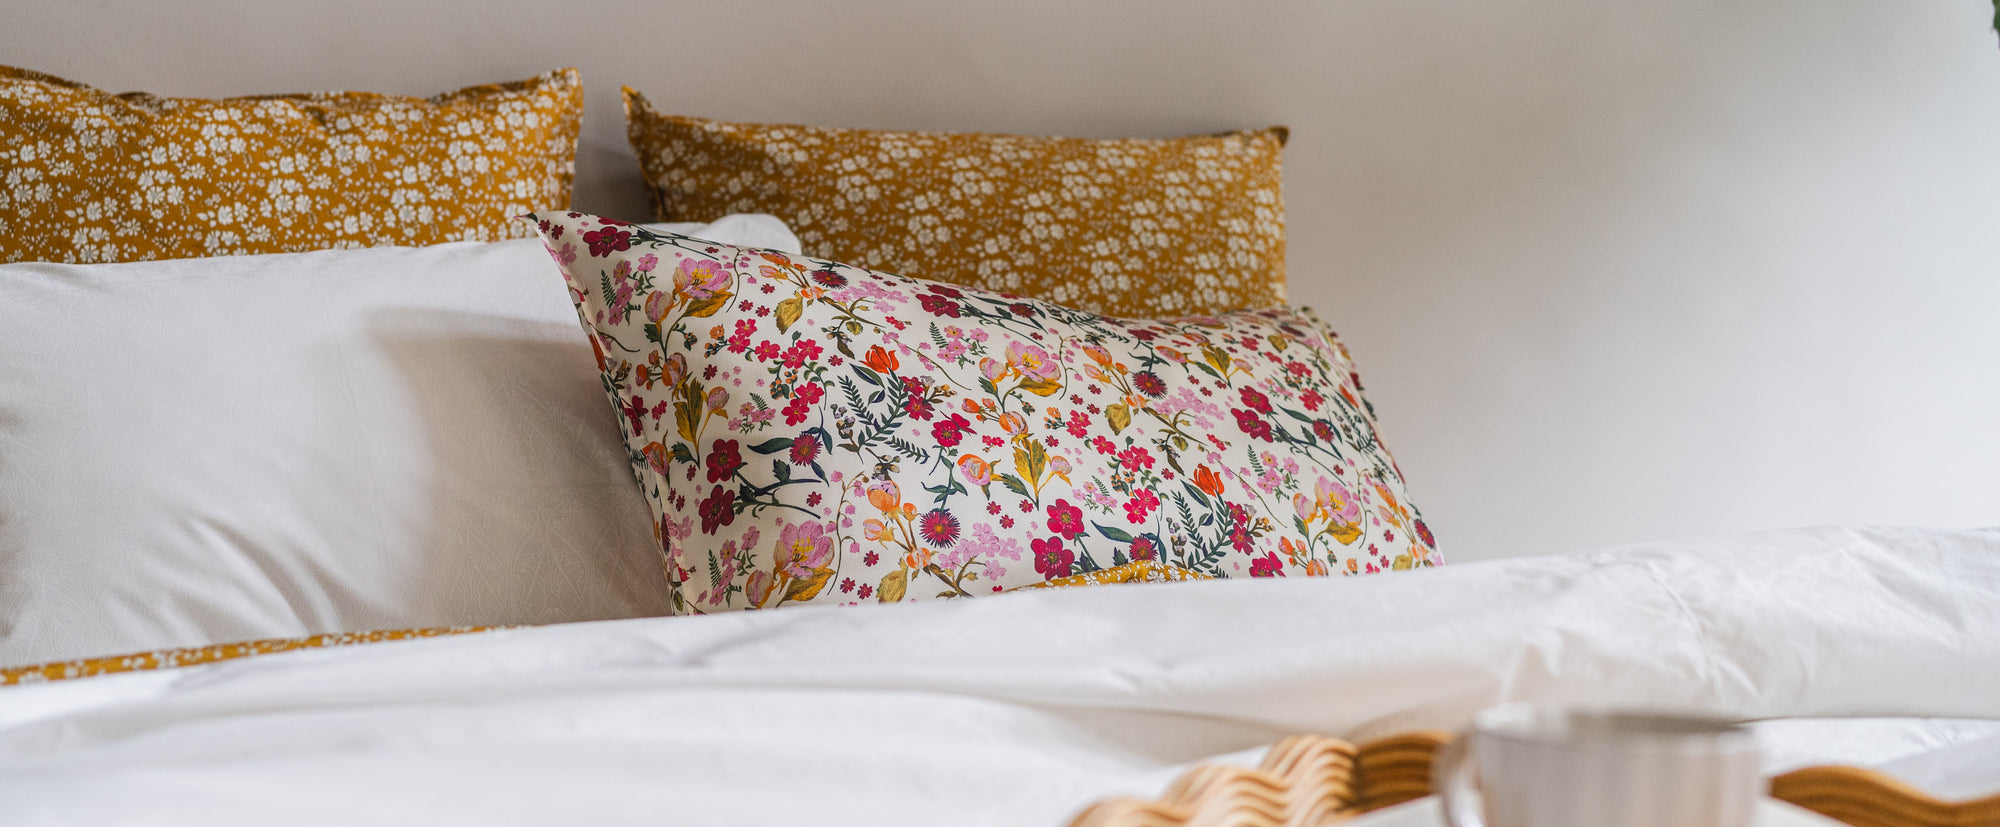 Luxury pillowcases made with Liberty fabrics by Coco & Wolf